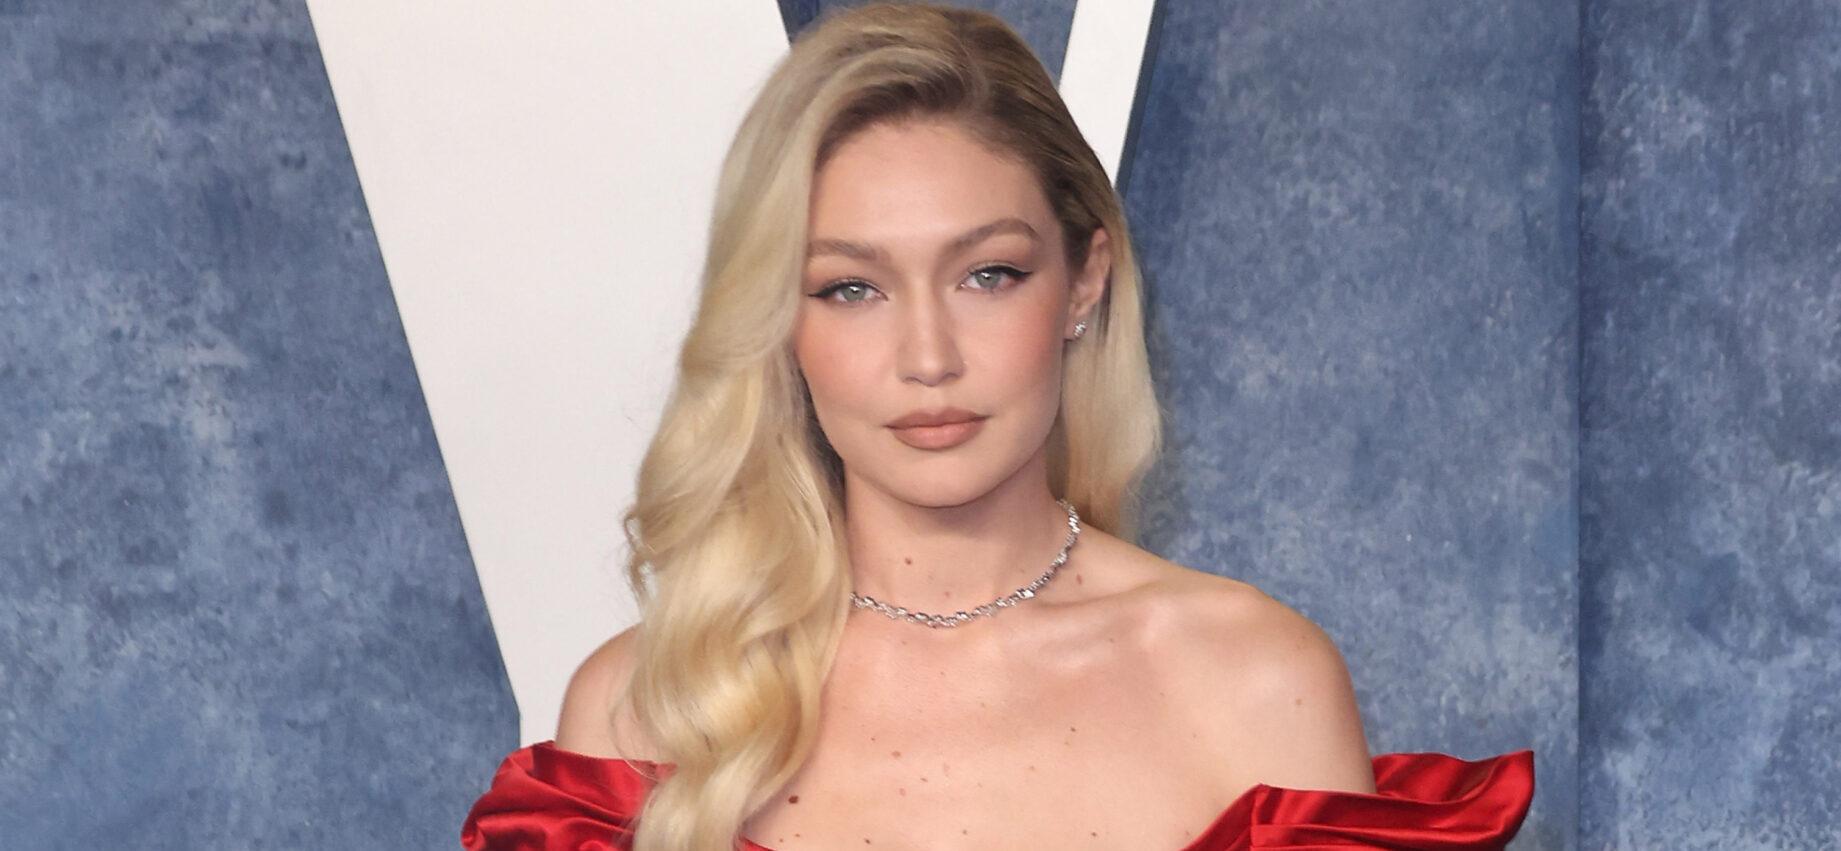 Gigi Hadid And Her Family ‘Forced’ To Change Phone Numbers Due To Death Threats